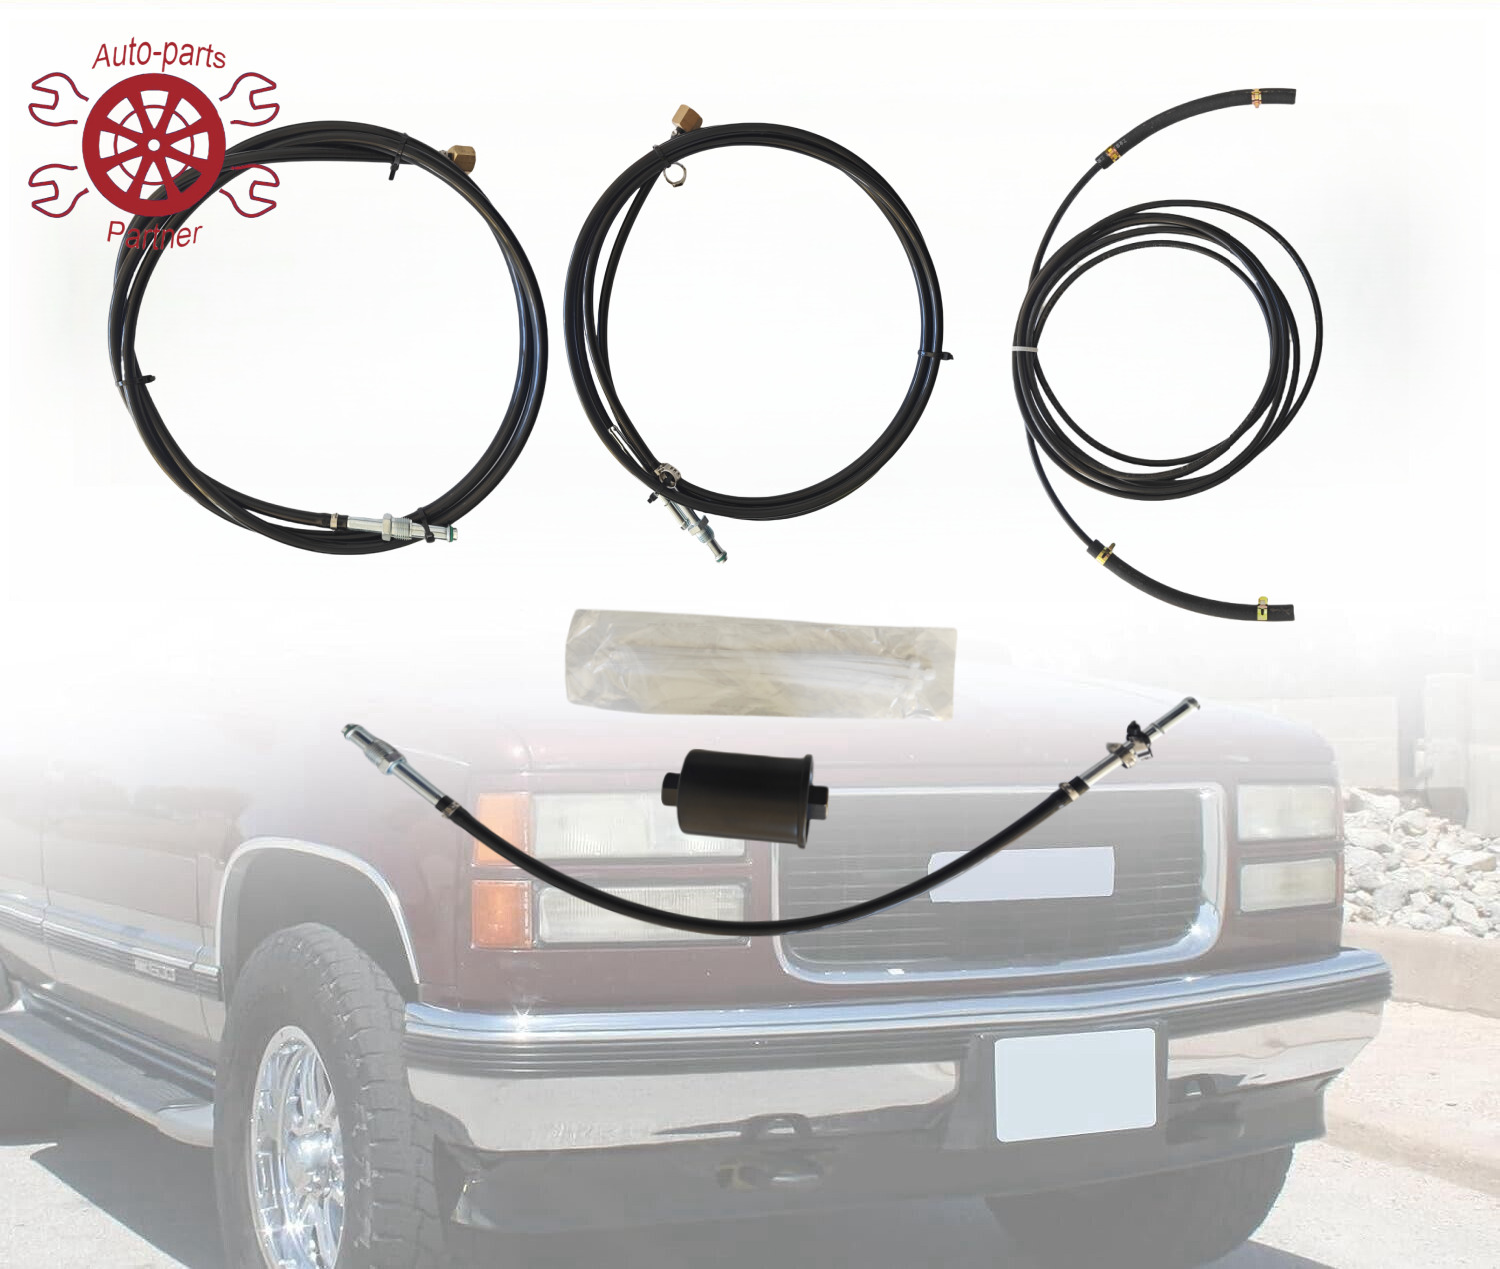 Gas Trucks Complete Nylon Fuel Line Replacement Kit Fits 1988-1997 Chevrolet Gmc